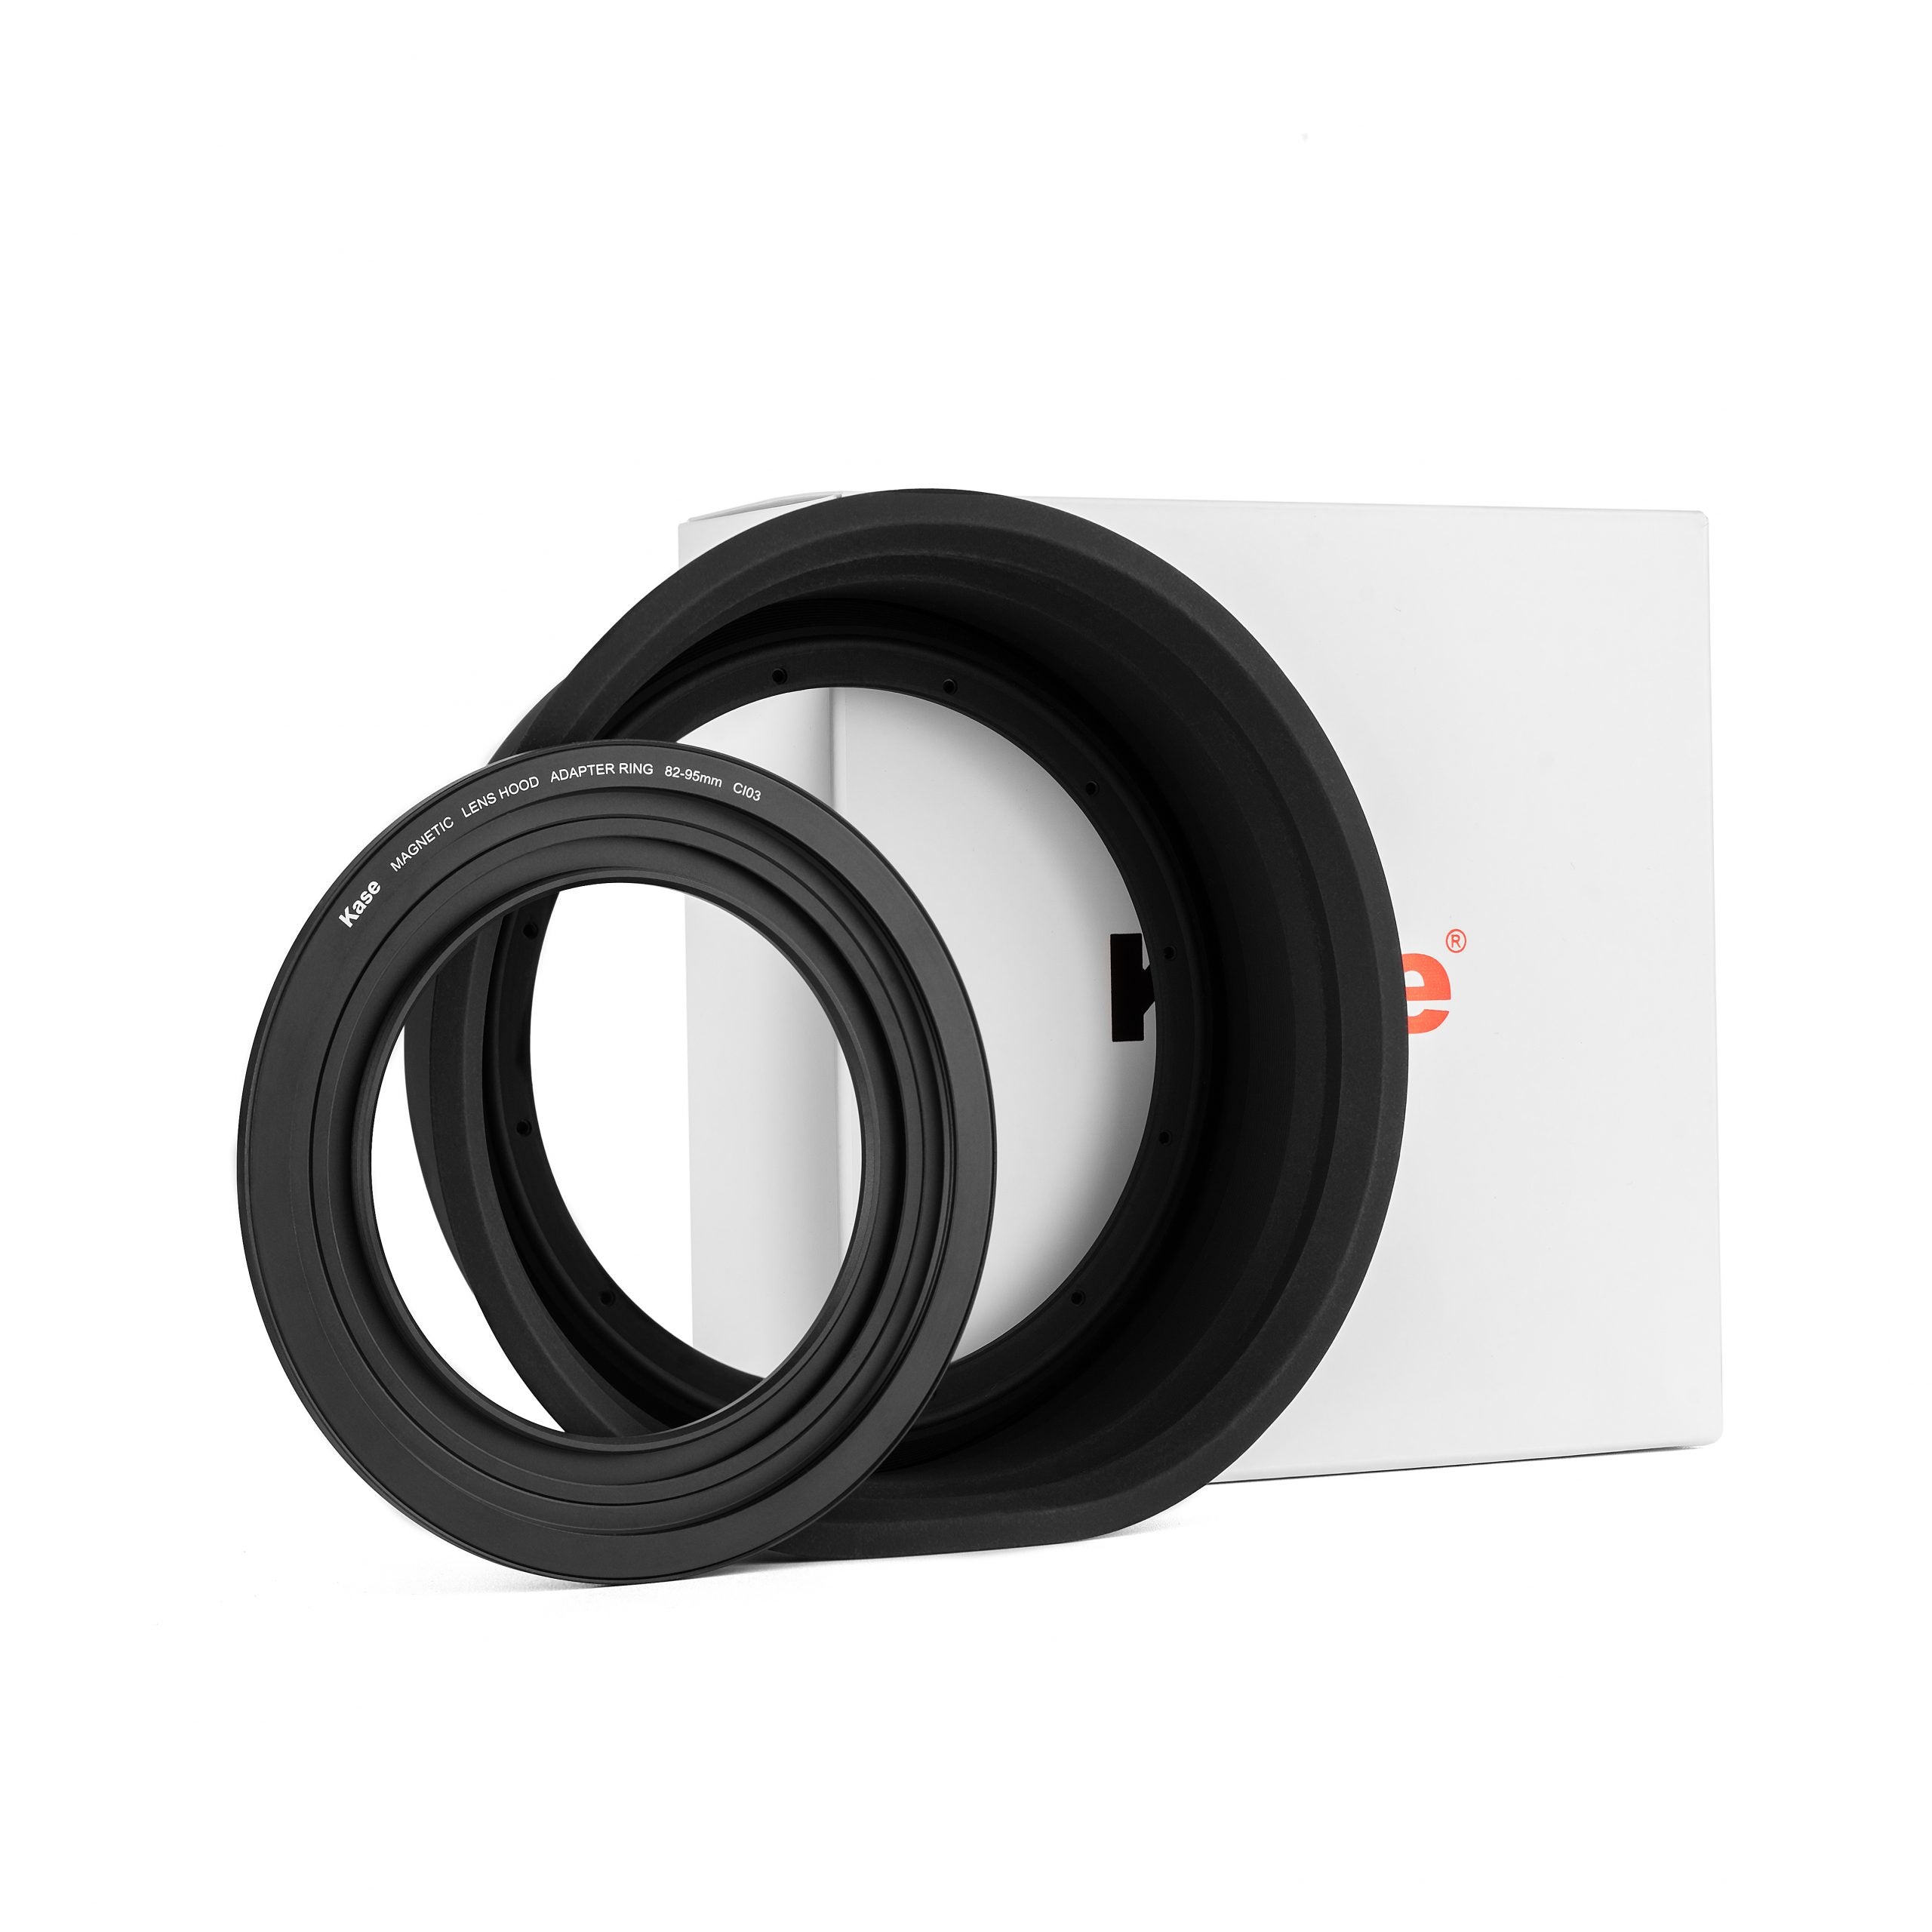 Product Image of Kase Magnetic Lens Hood and Adaptor 95mm